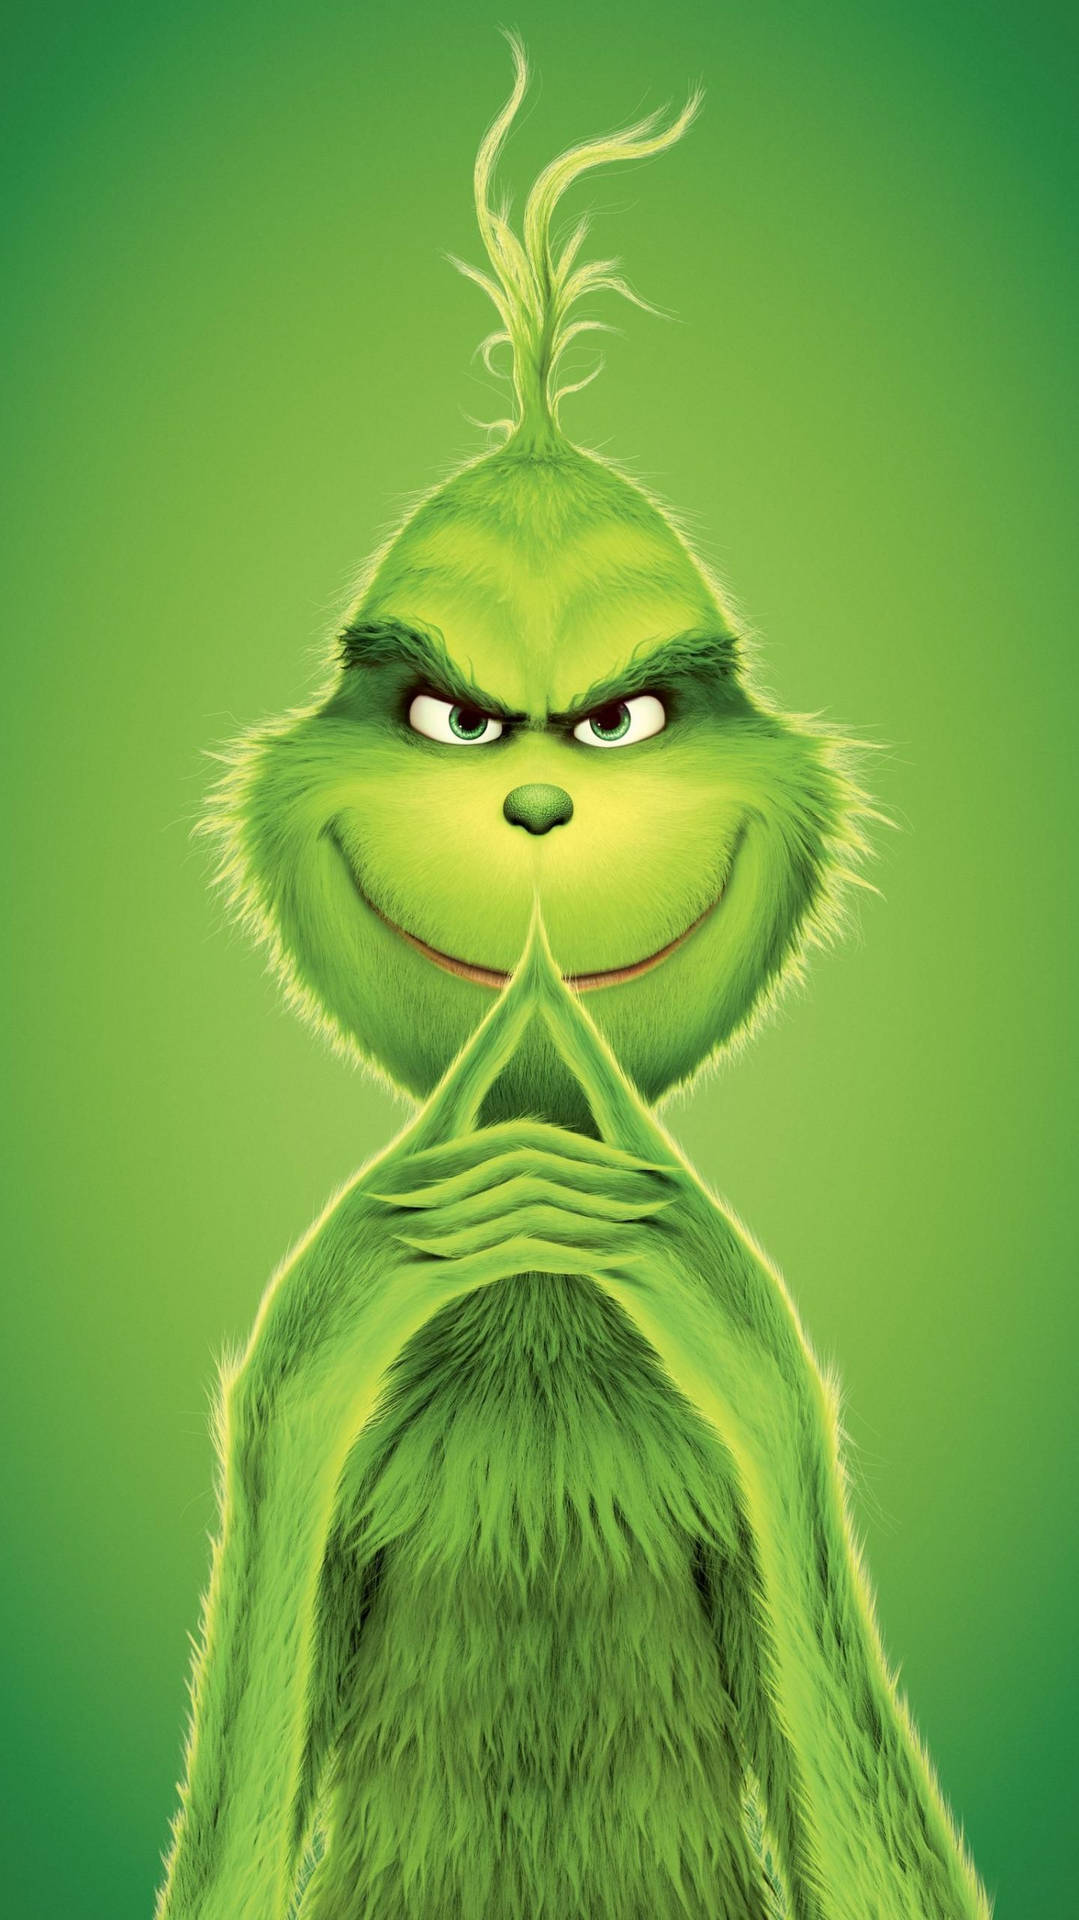 The Grinch Evil Look